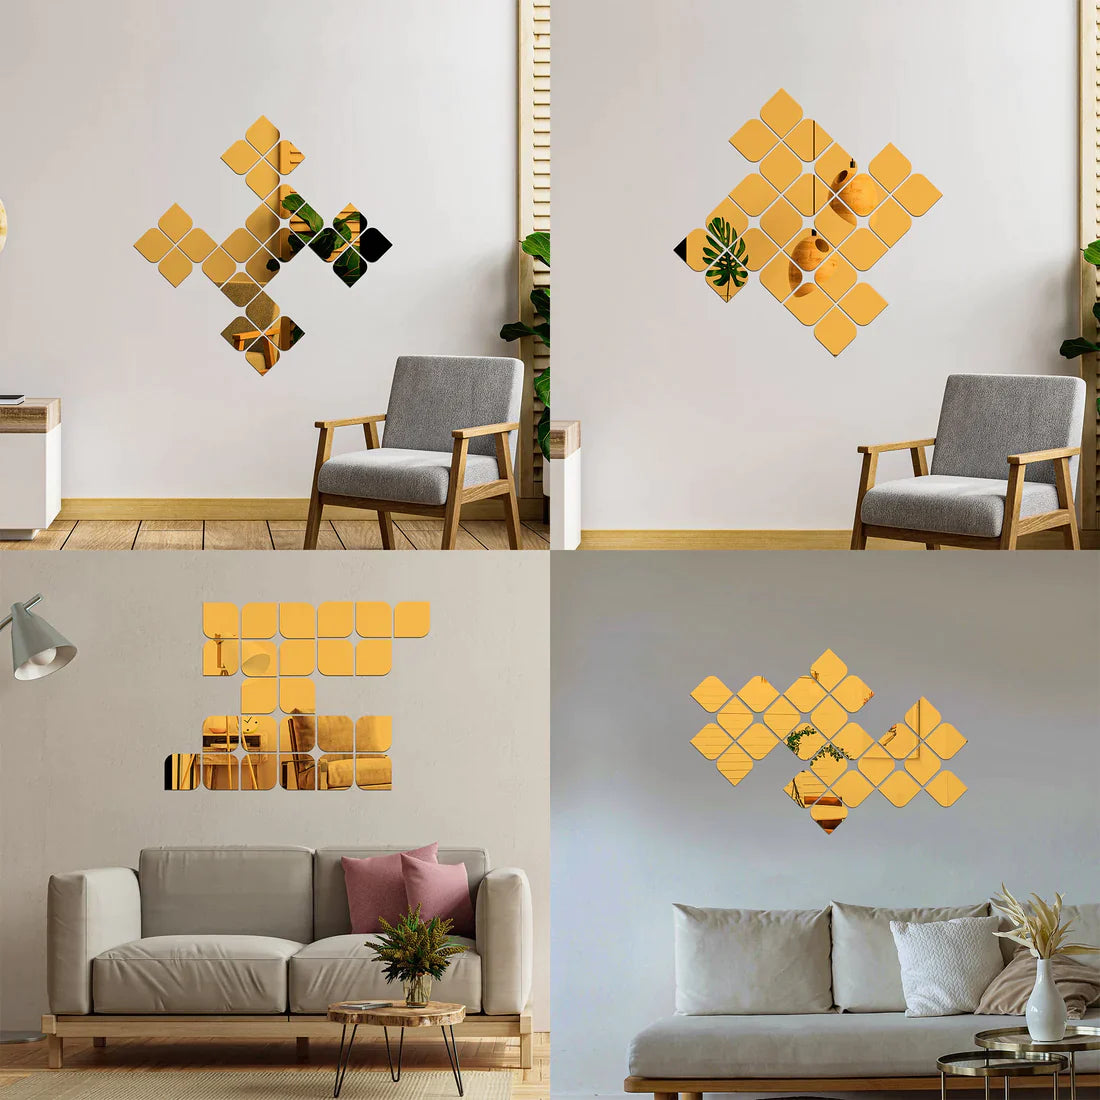 Acrylic Quadrilateral Mirror Wall Stickers